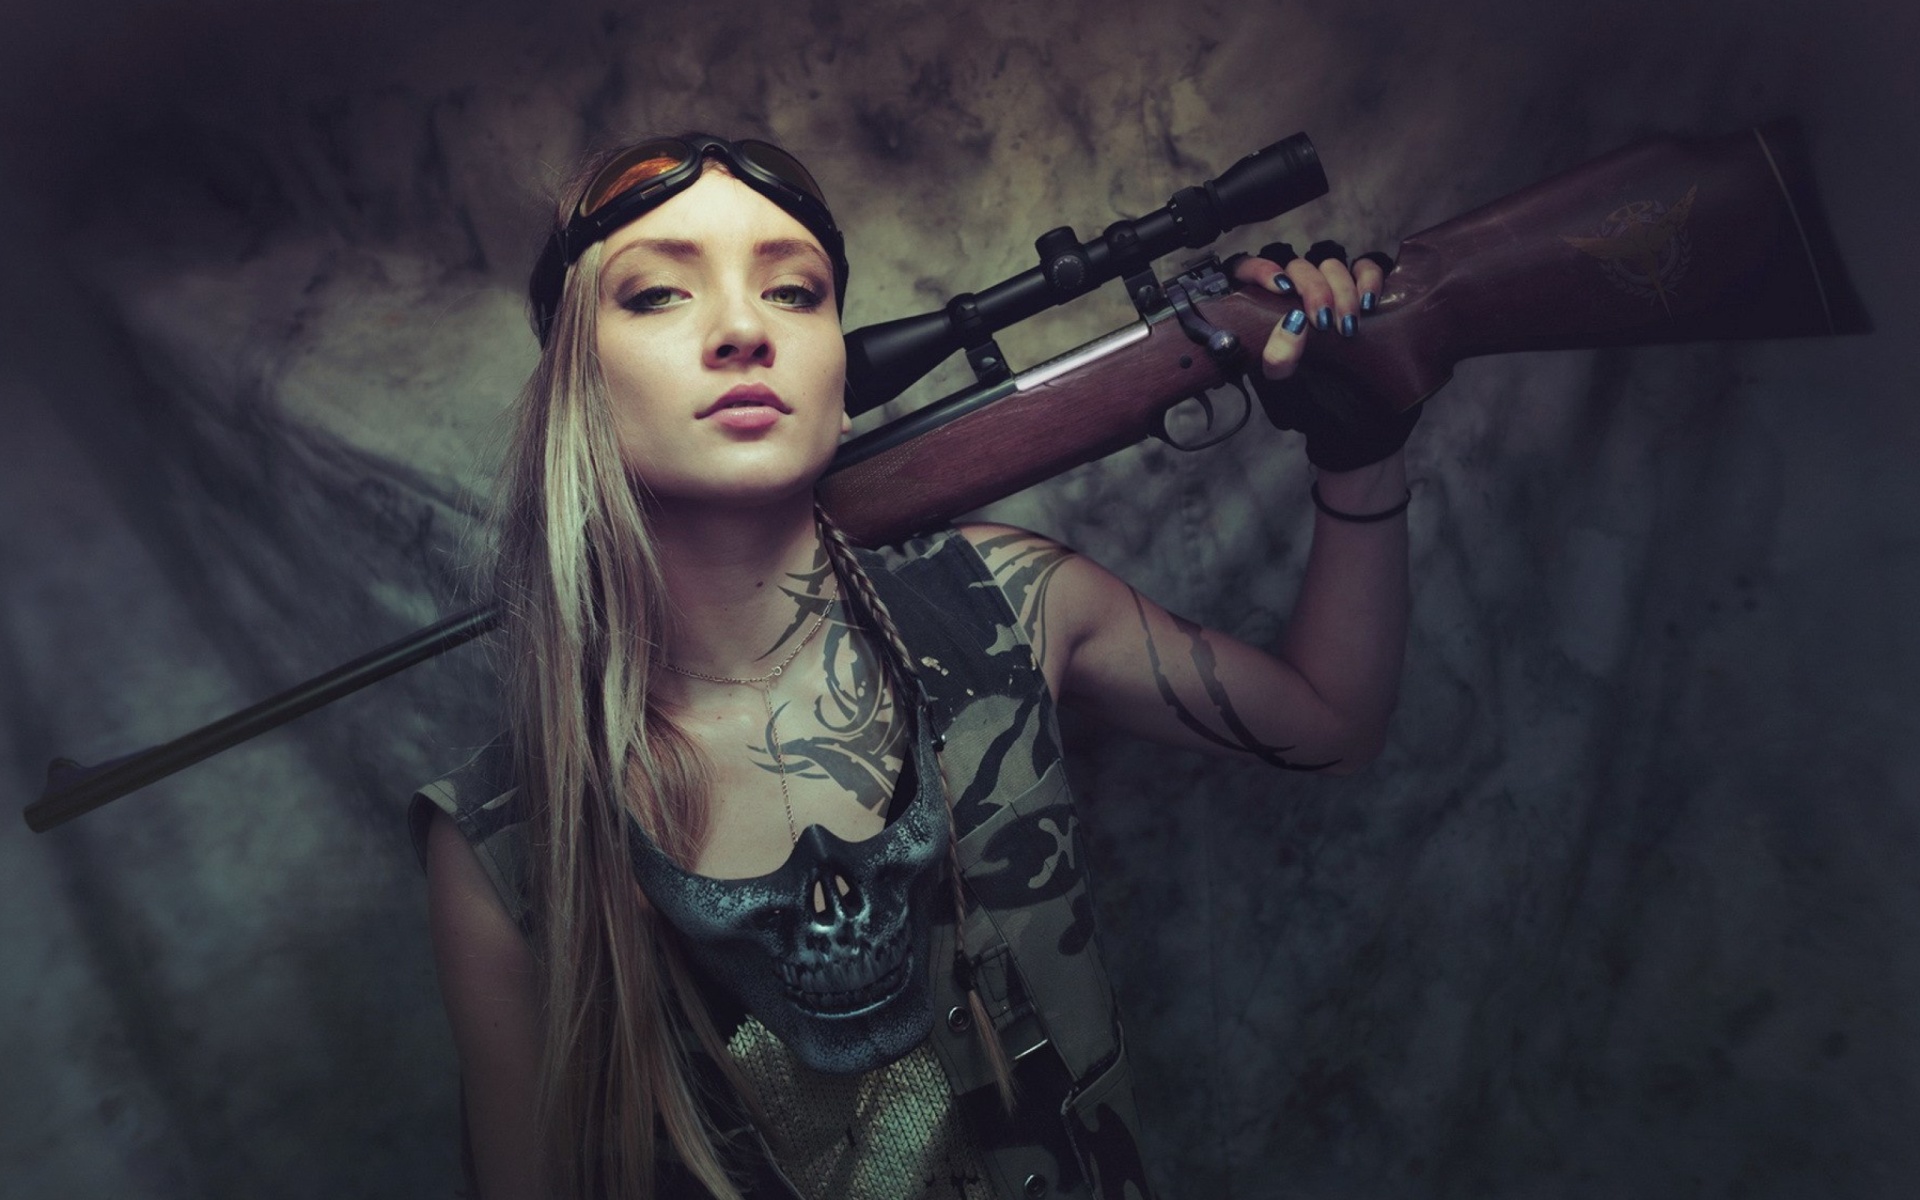 Soldier girl with a sniper rifle screenshot #1 1920x1200